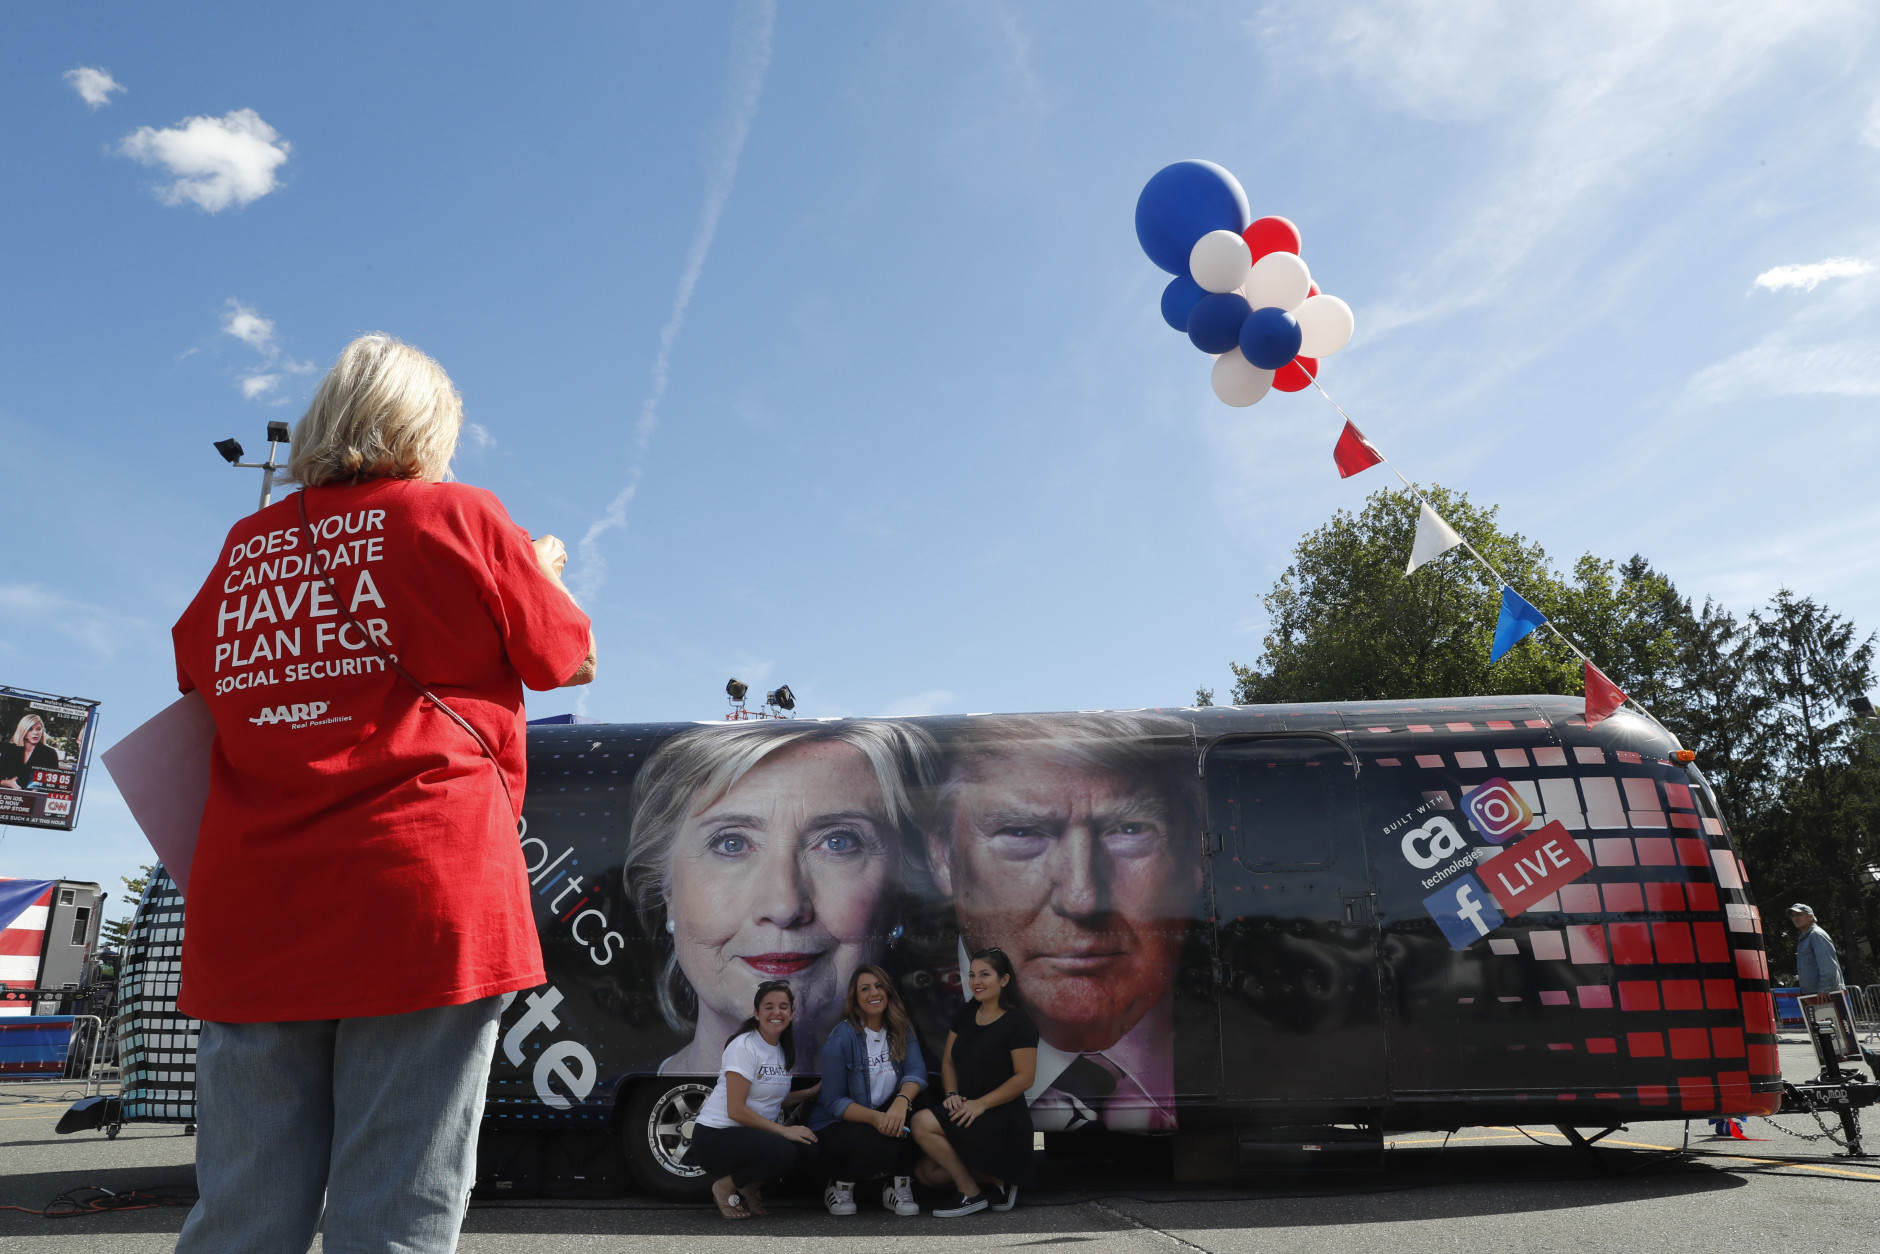 People pose for a photo kneeling near a bus adorned with photos of candidates Hillary Clinton and Donald Trump before the presidential debate at Hofstra University in Hempstead, N.Y., Monday, Sept. 26, 2016. (AP Photo/Mary Altaffer)